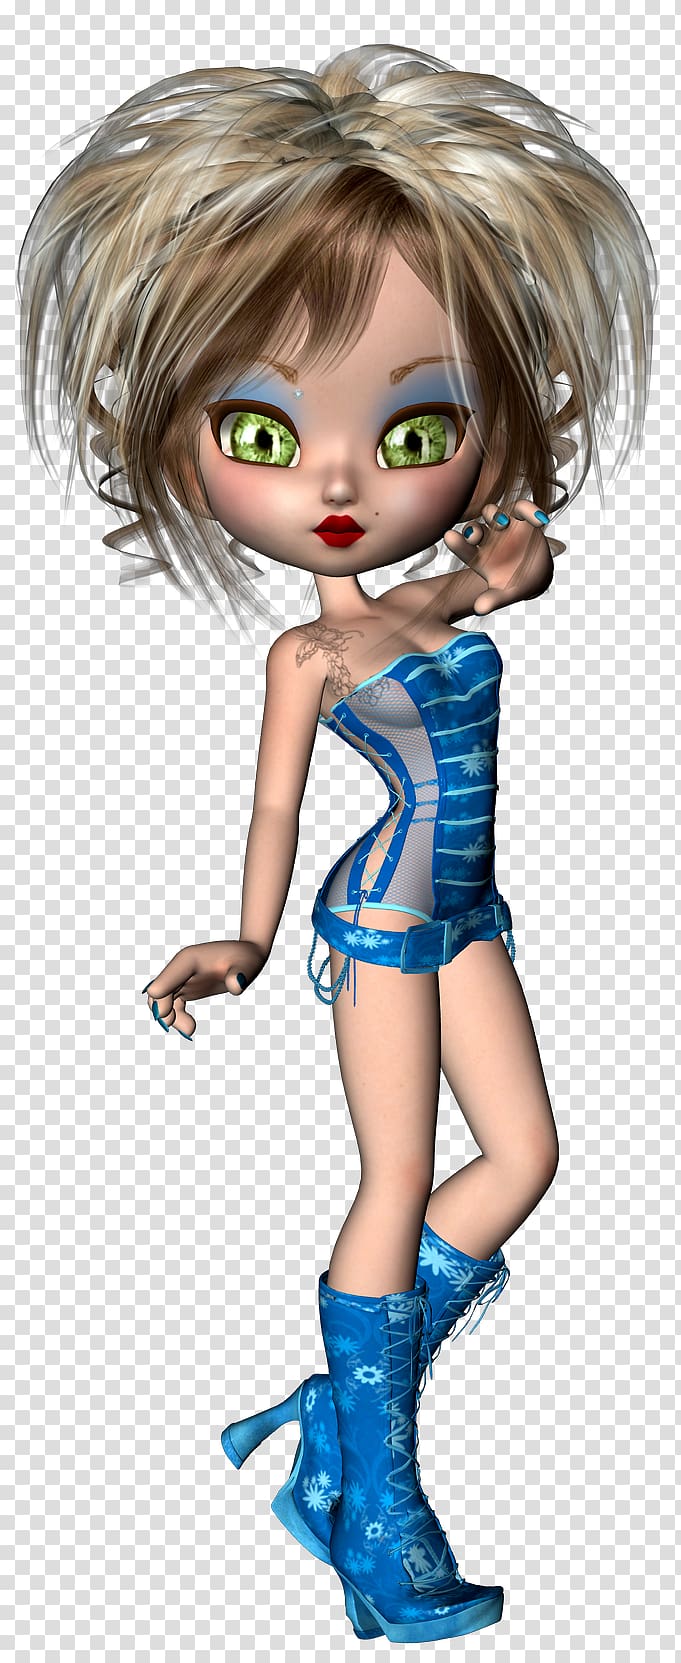 Doll Duda 3D computer graphics , doll transparent background PNG clipart